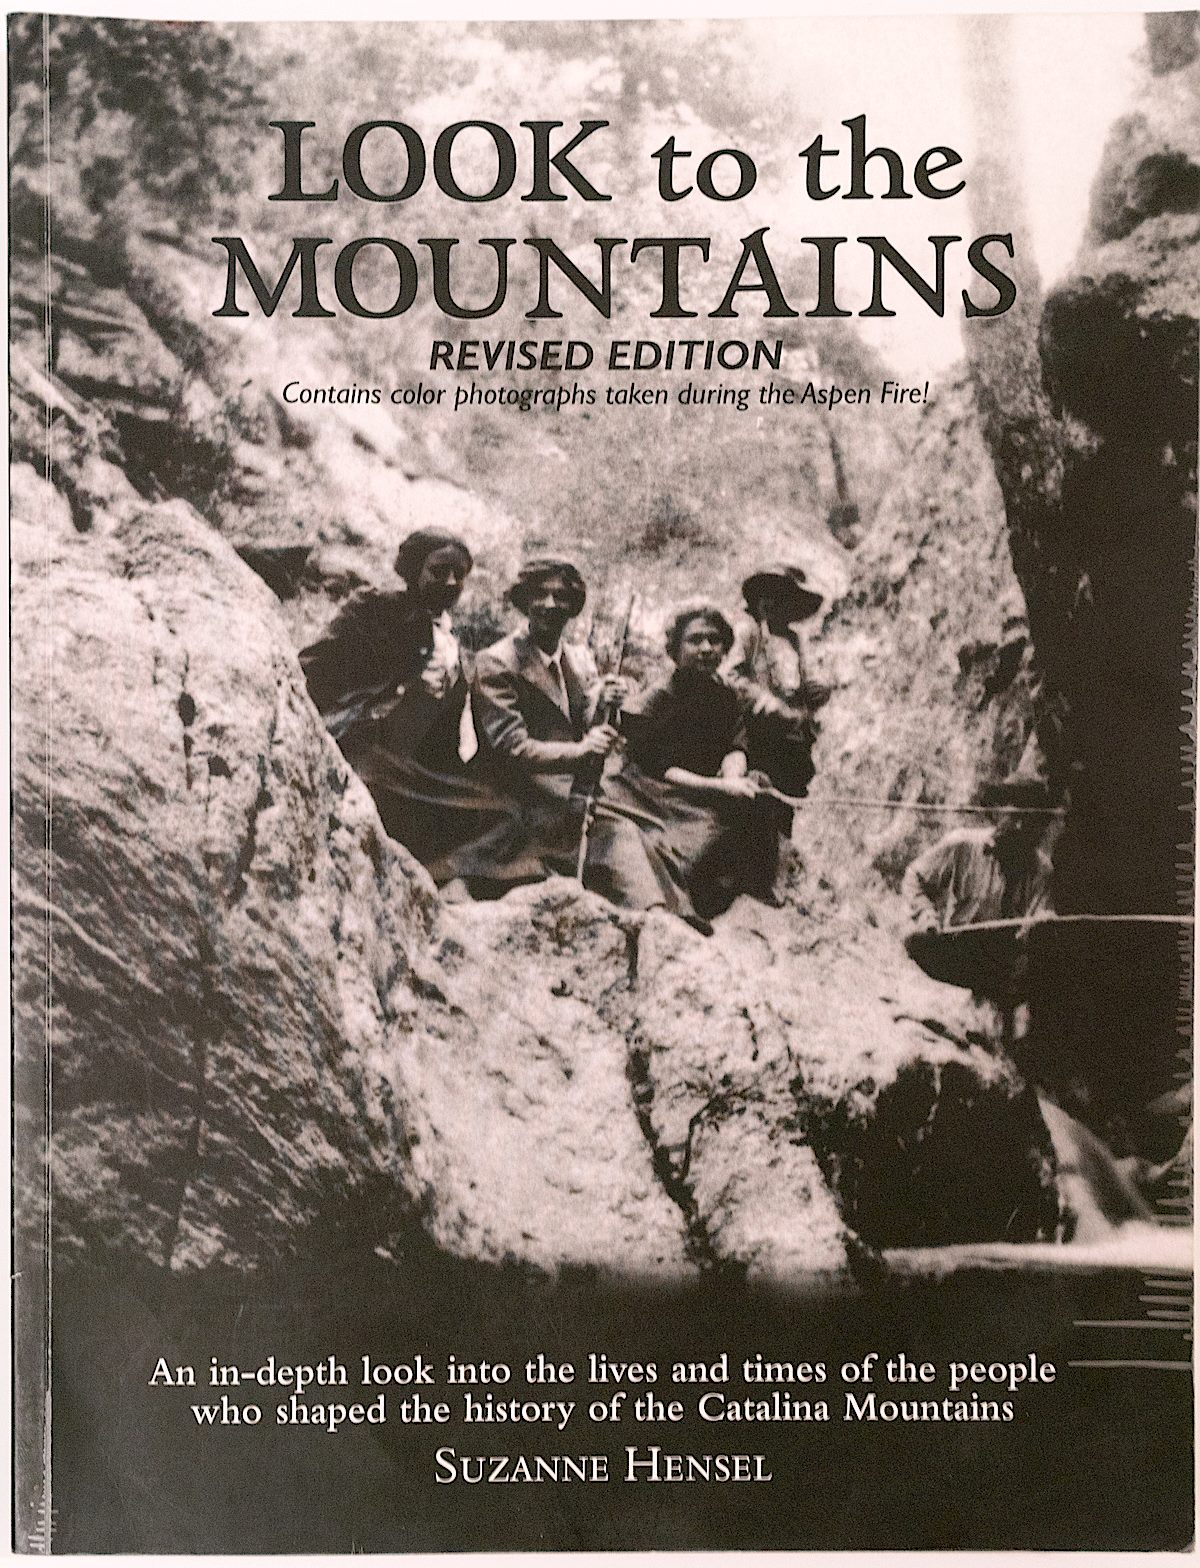 Look to the Mountains, An in-depth look into the lives and times of the people who shaped the history of the Catalina Mountains - Revised Edition, Suzanne Hensel. December 2016.